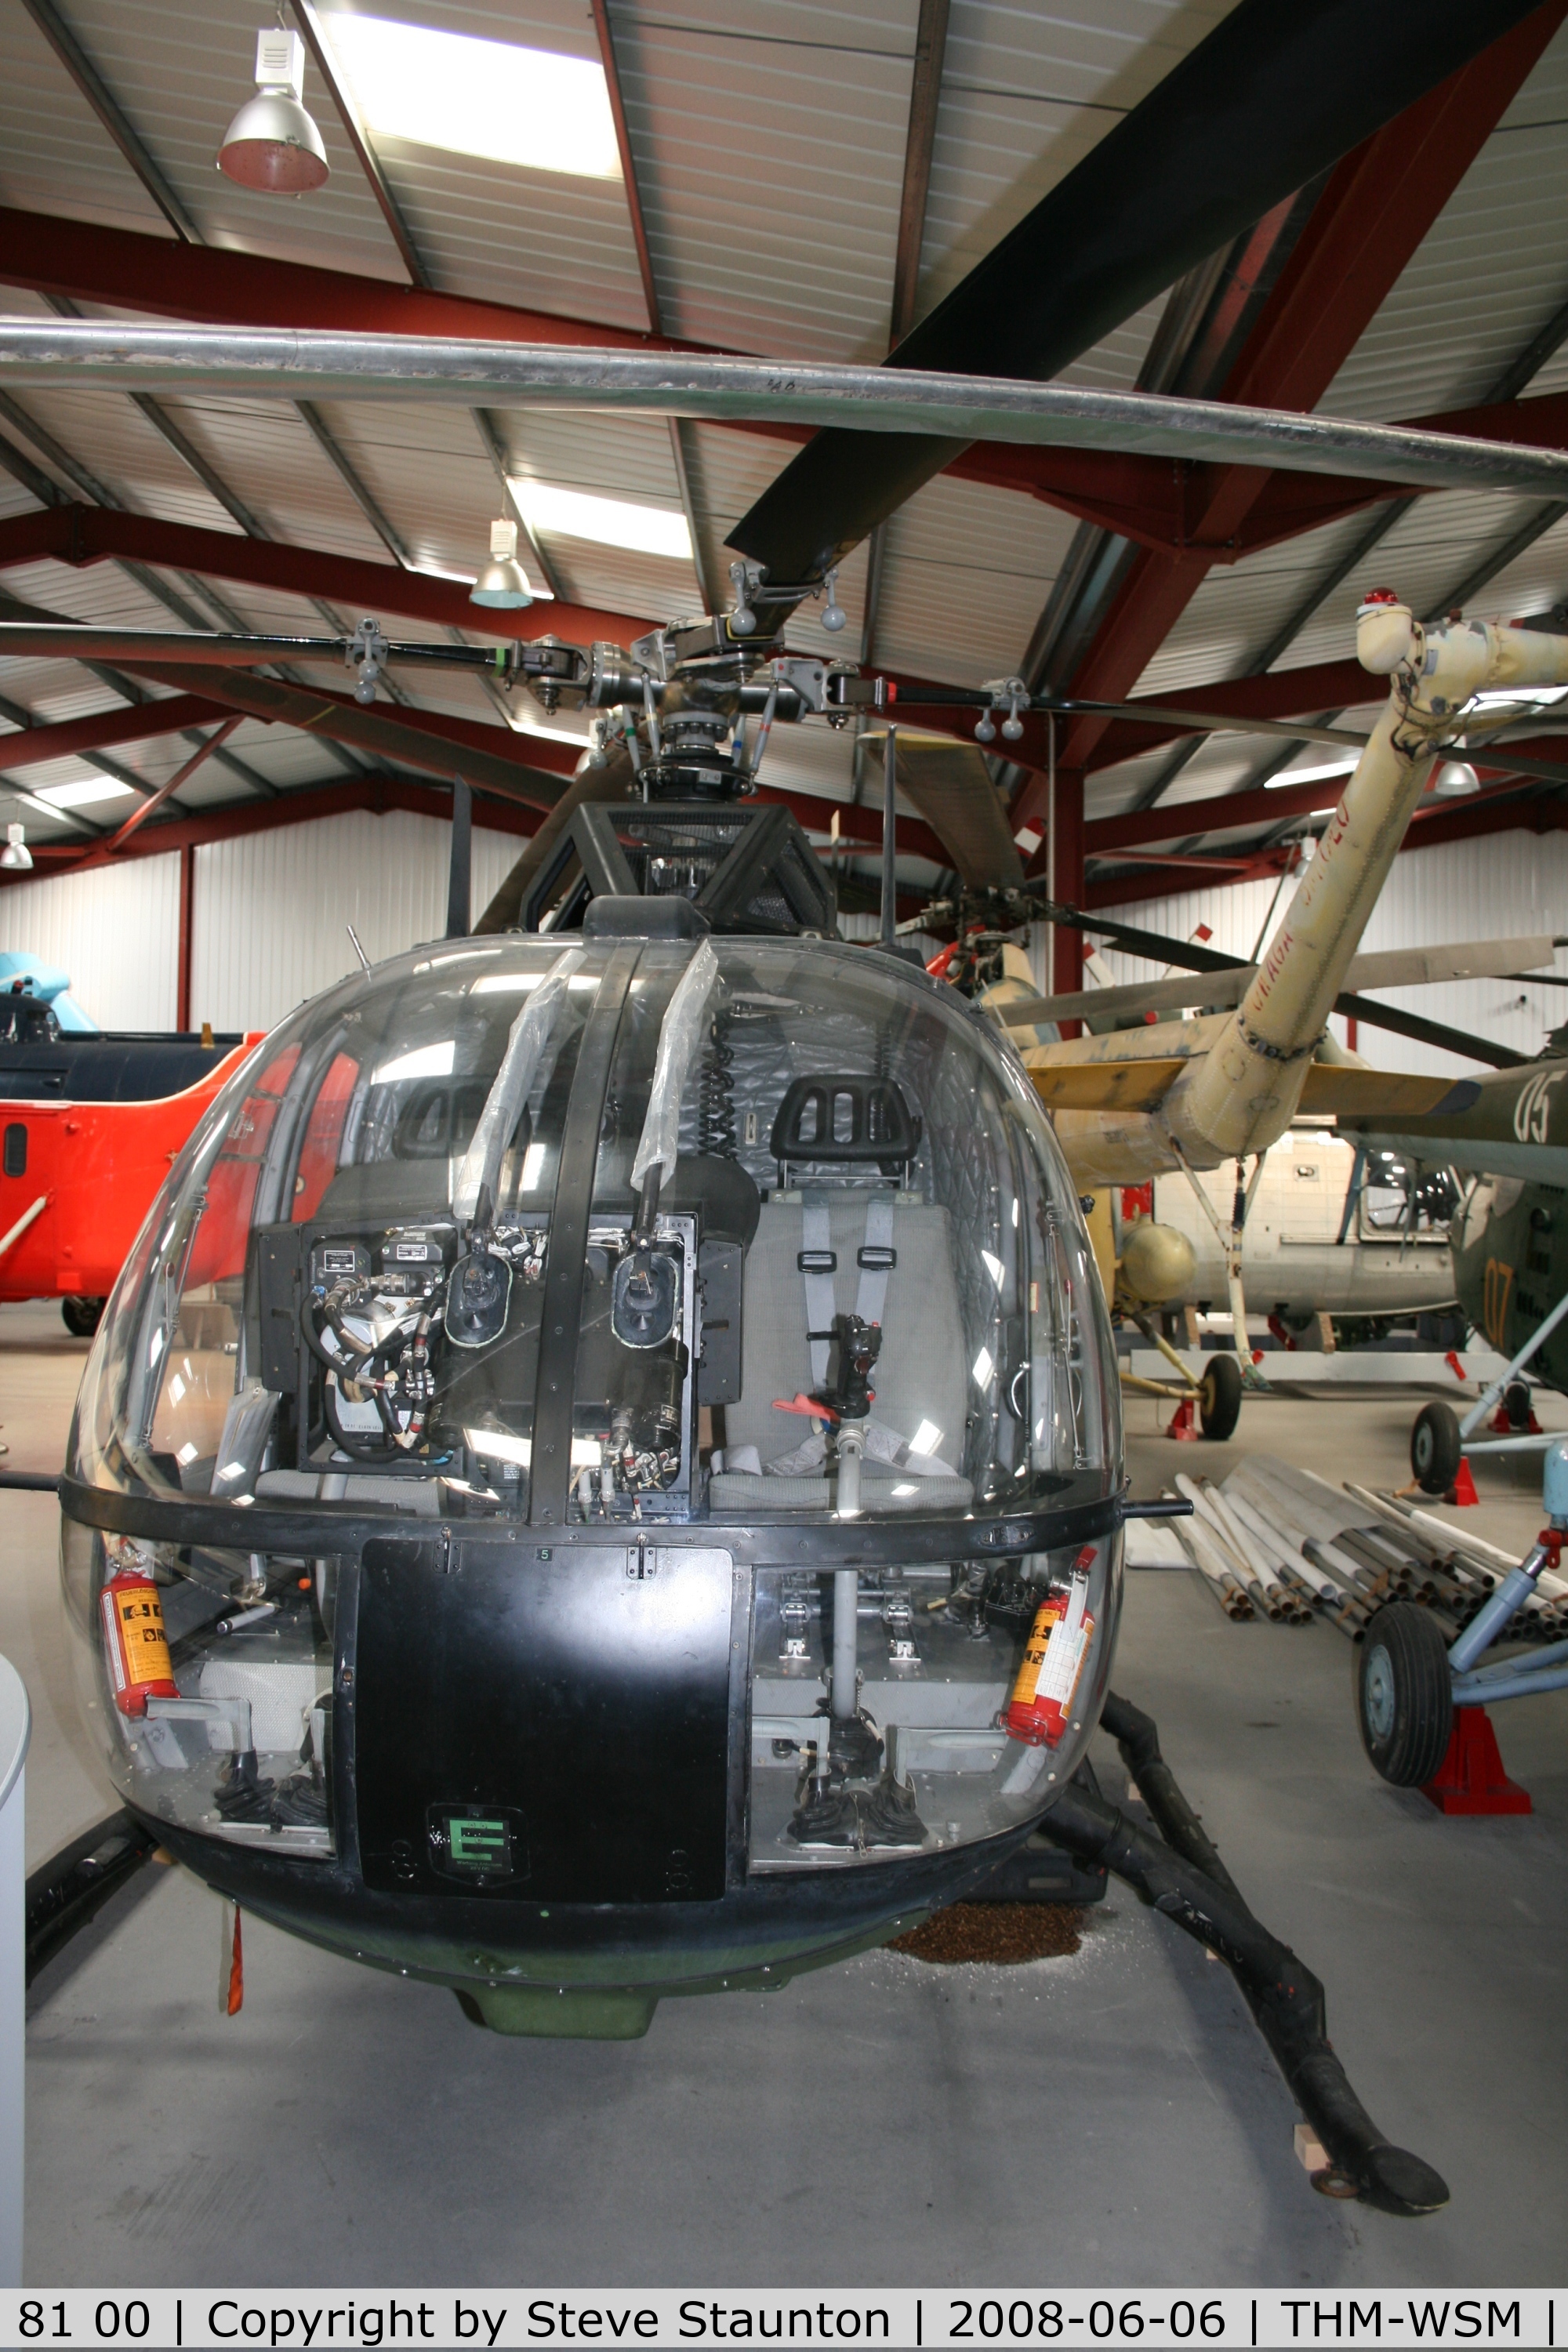 81 00, 1984 MBB Bo.105M C/N 5100, Taken at the Helicopter Museum (http://www.helicoptermuseum.co.uk/)